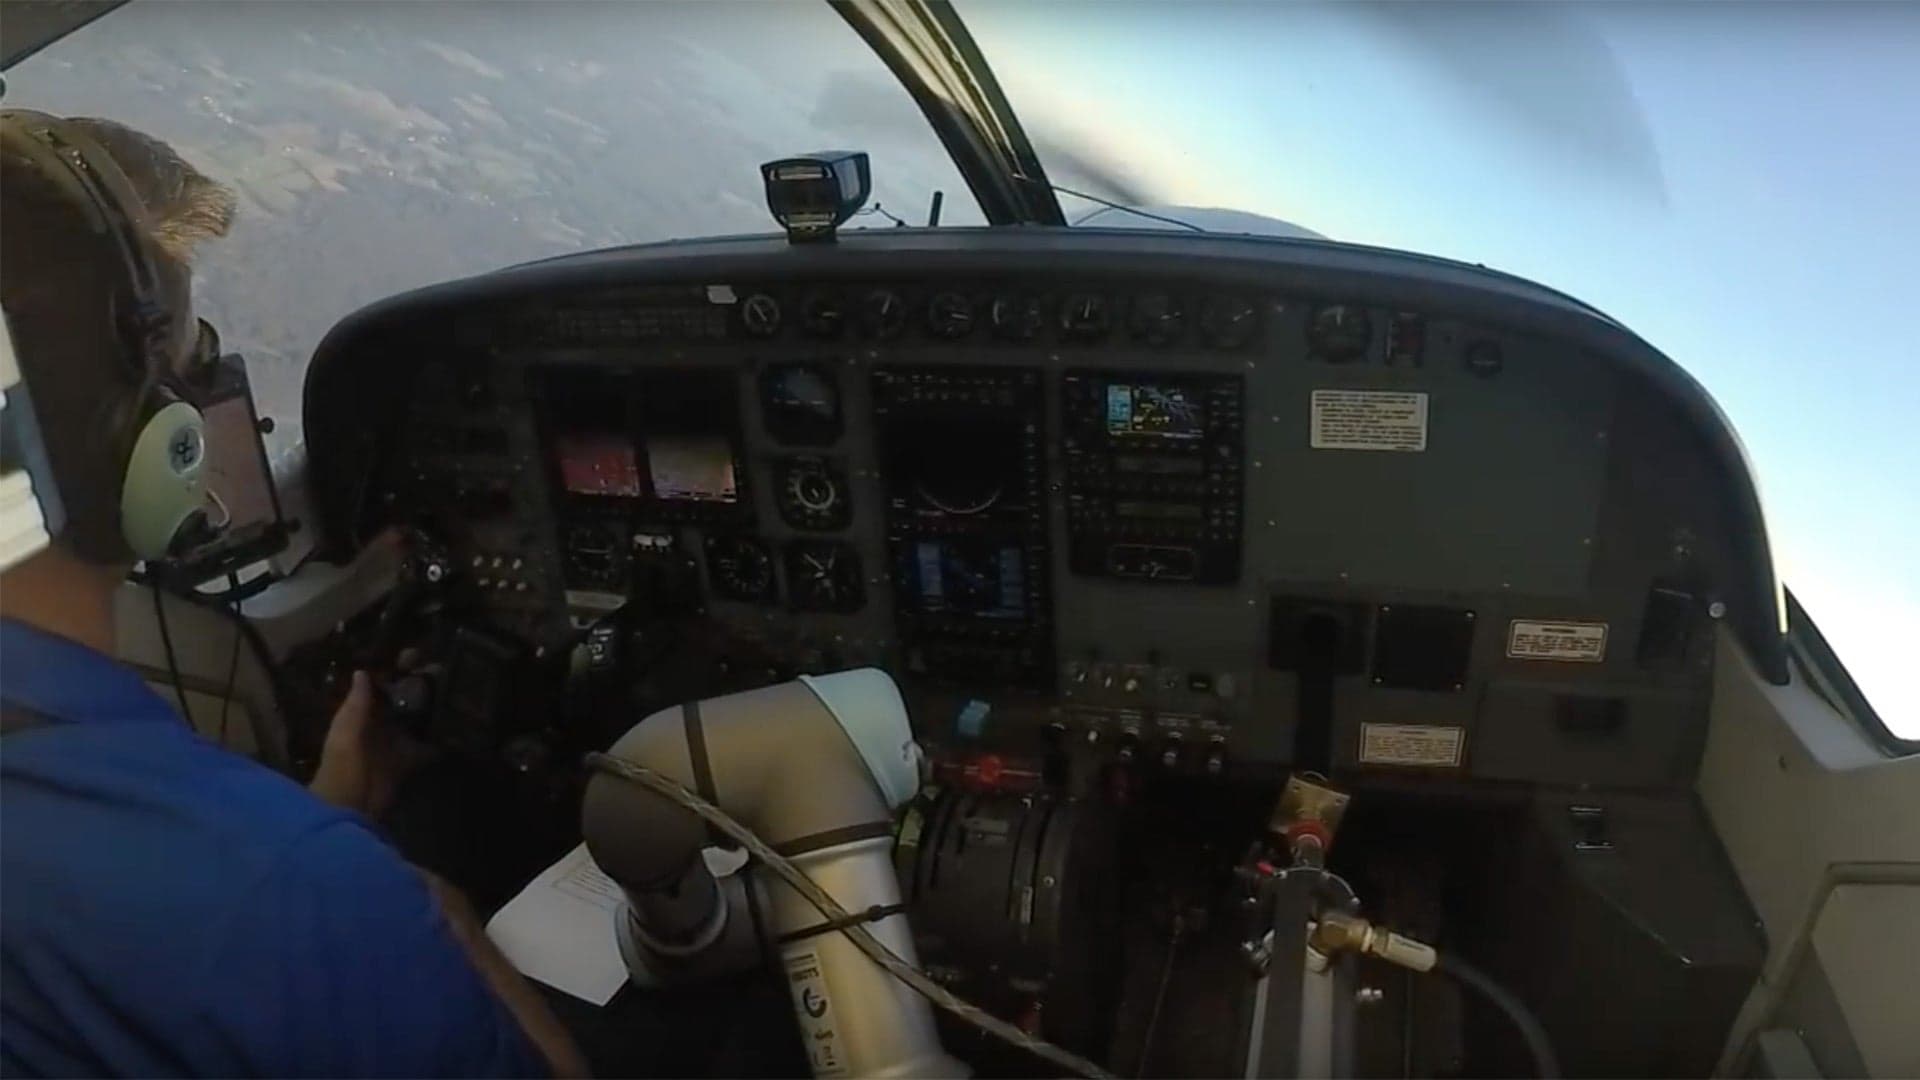 Watch This DARPA Robot Co-Pilot Take Over a Plane’s Controls